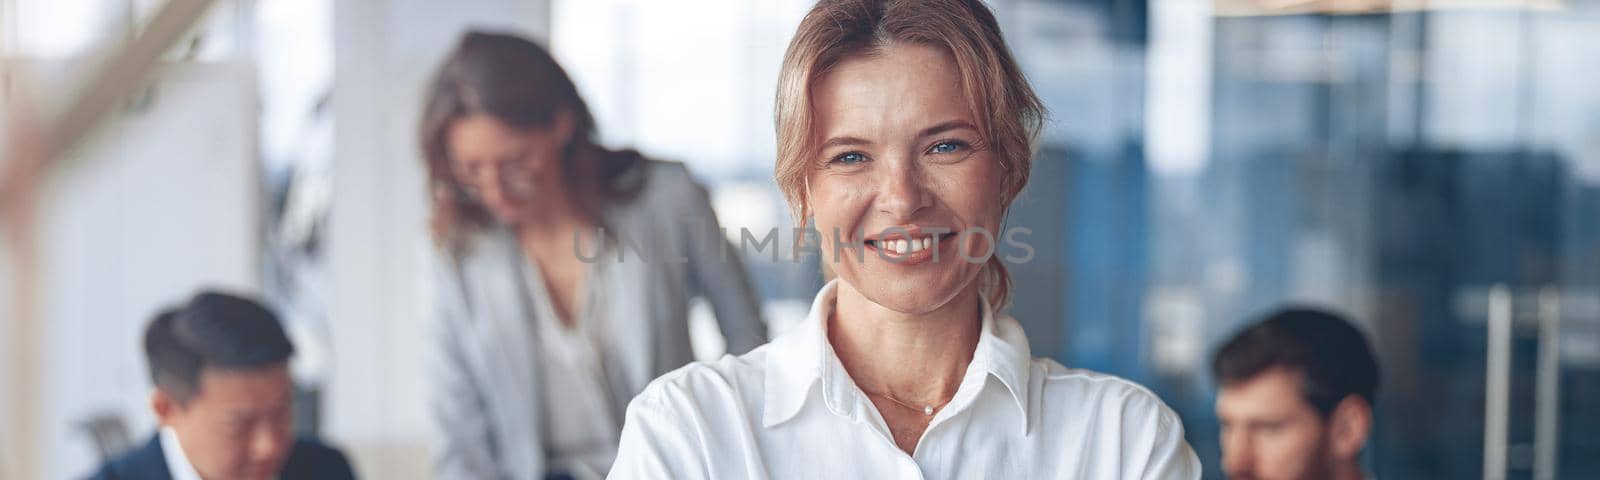 Portrait of beautiful smiling mature businesswoman with her colleagues on background in office by Yaroslav_astakhov